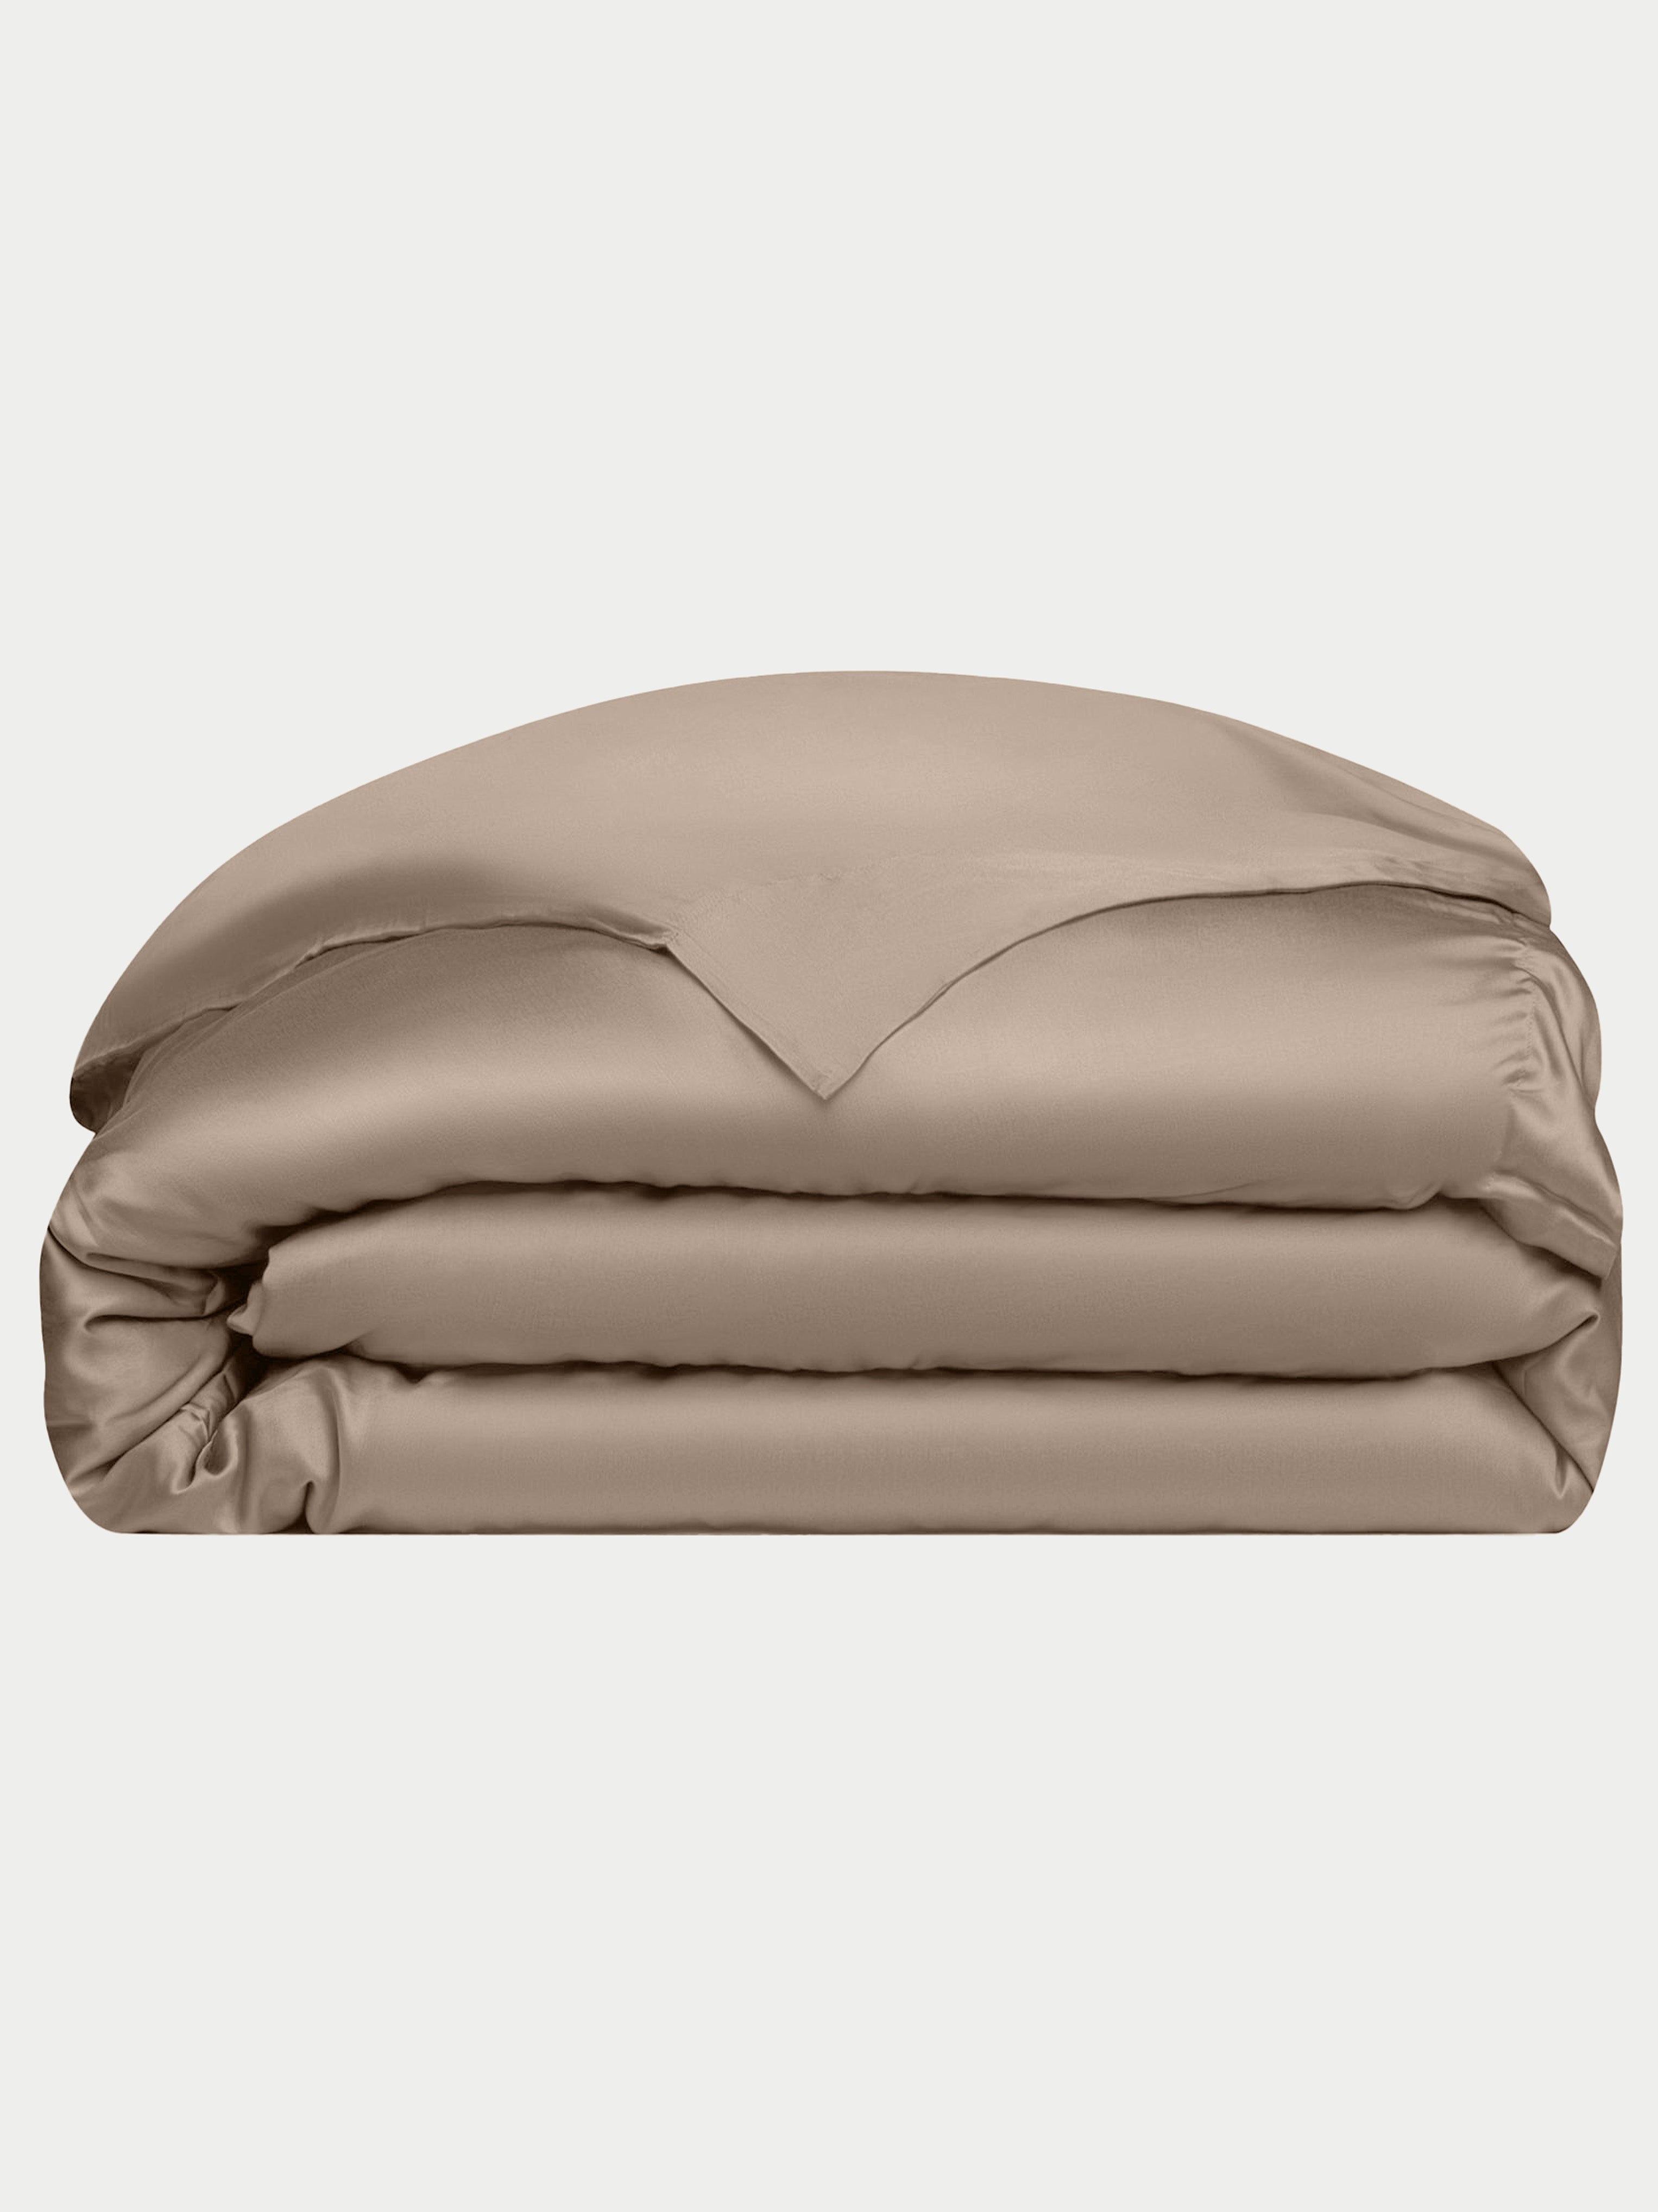 Walnut duvet cover folded with white background |Color:Walnut